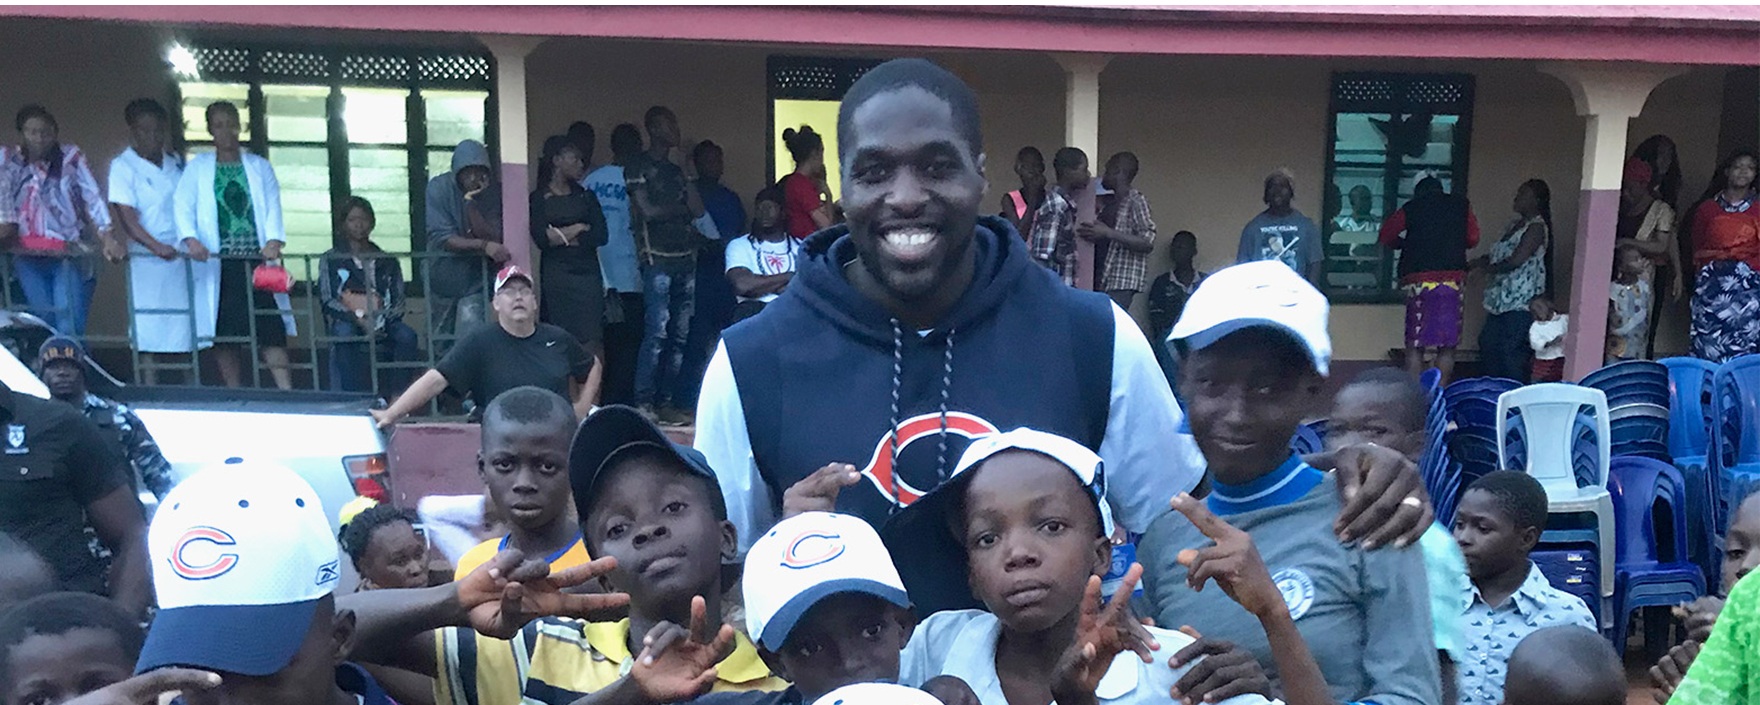 Sam Acho with group of children